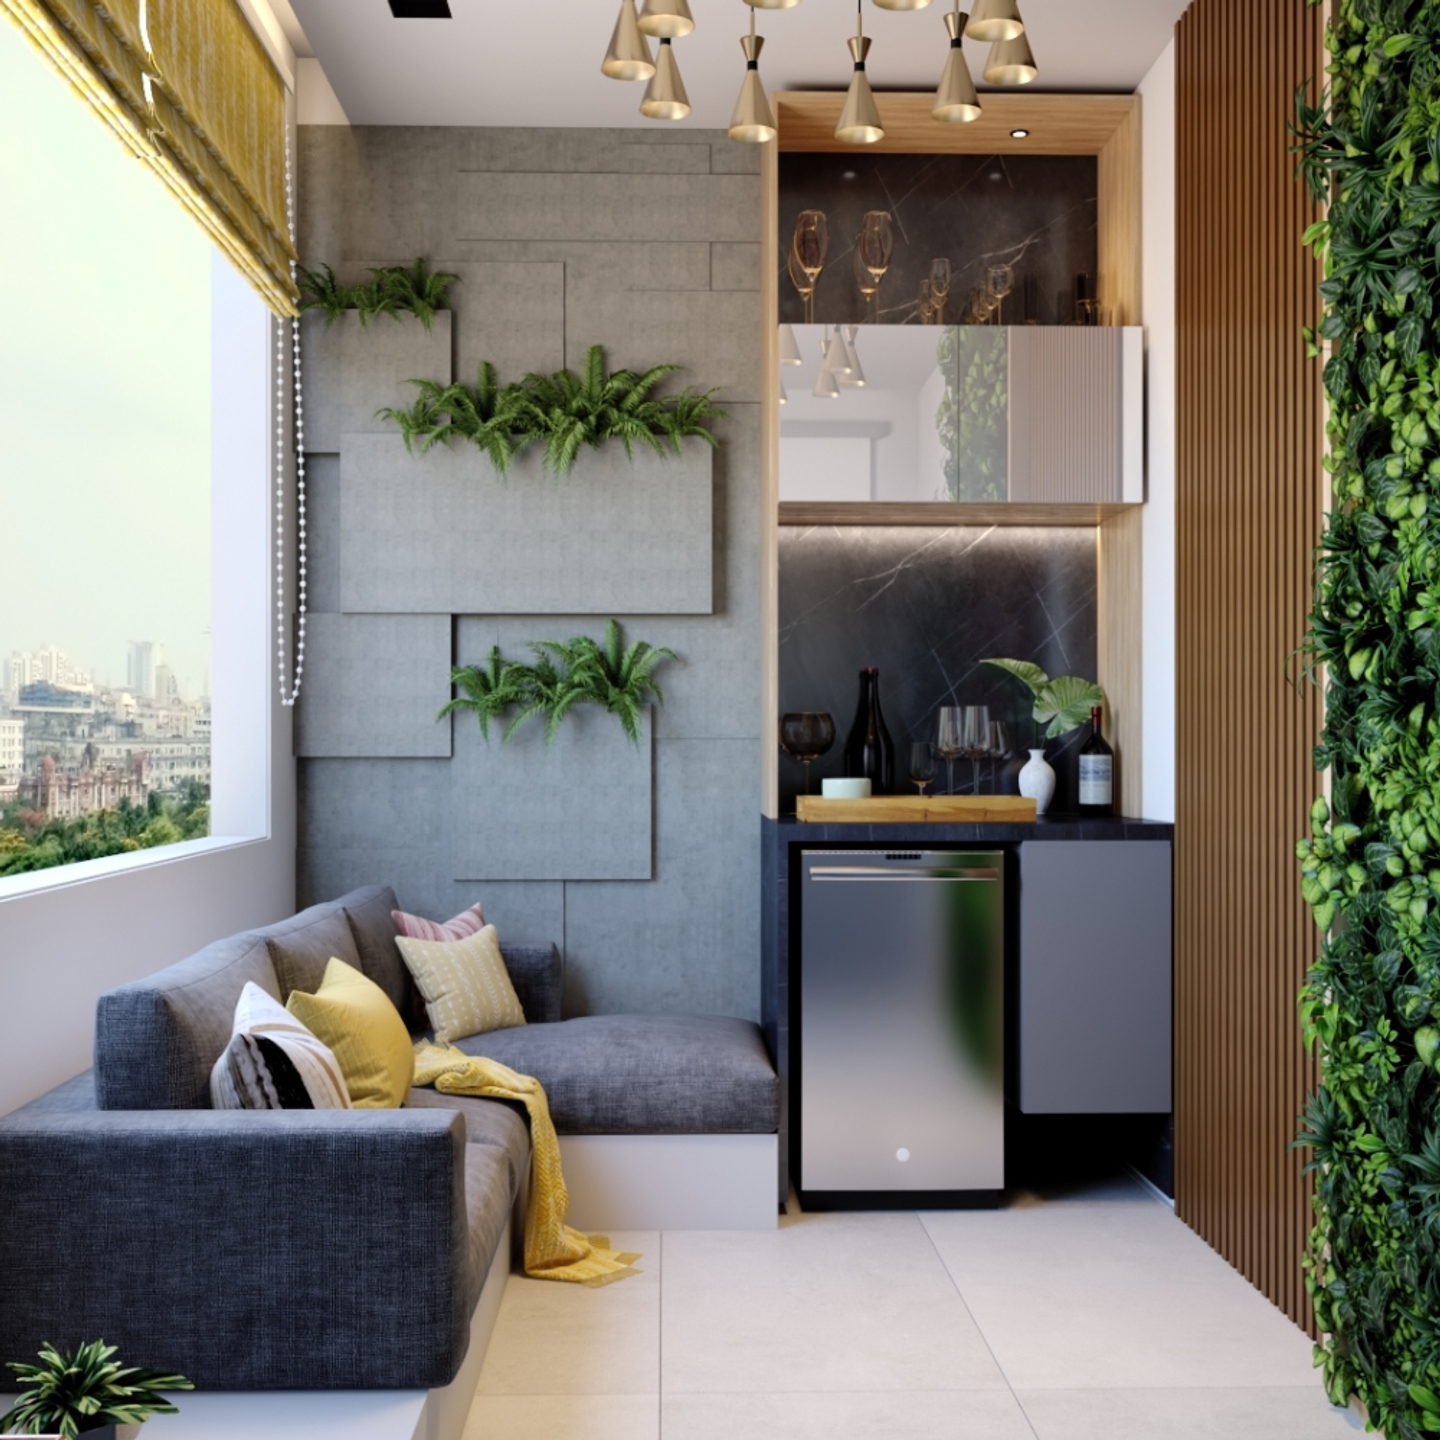 Balcony Design With Concrete Wall Panelling And A Seating Area - Livspace